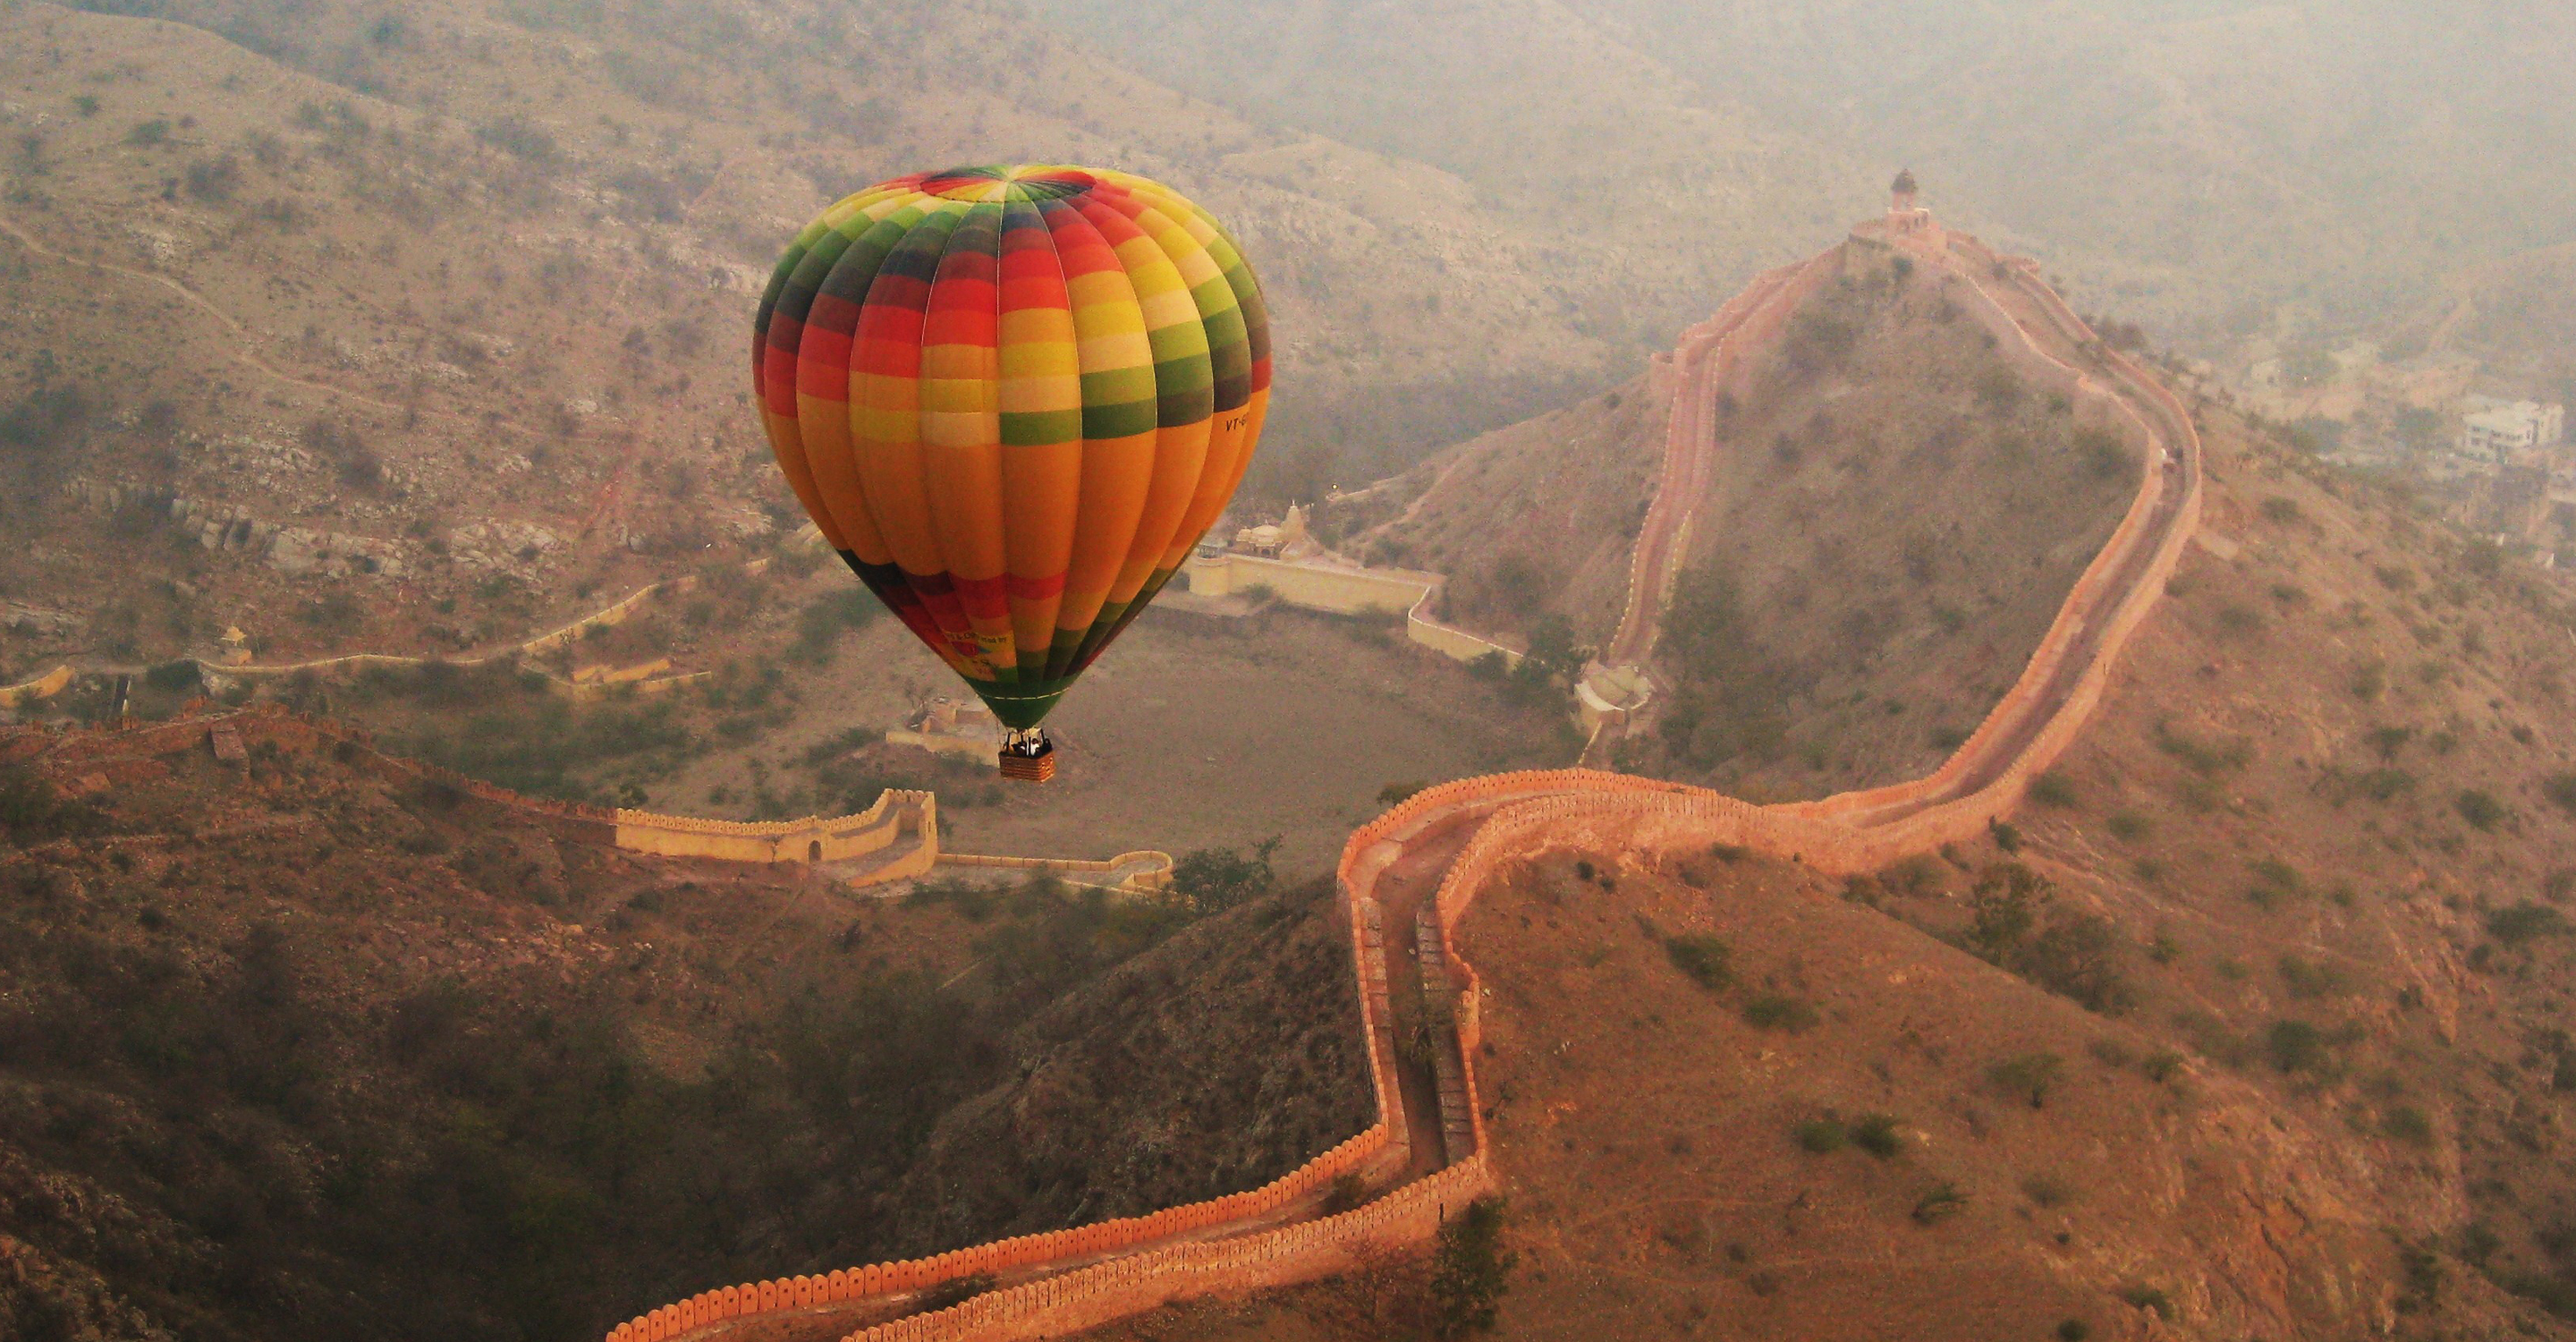 A hot air balloon floats over a sandstone fort in Jaipur, India